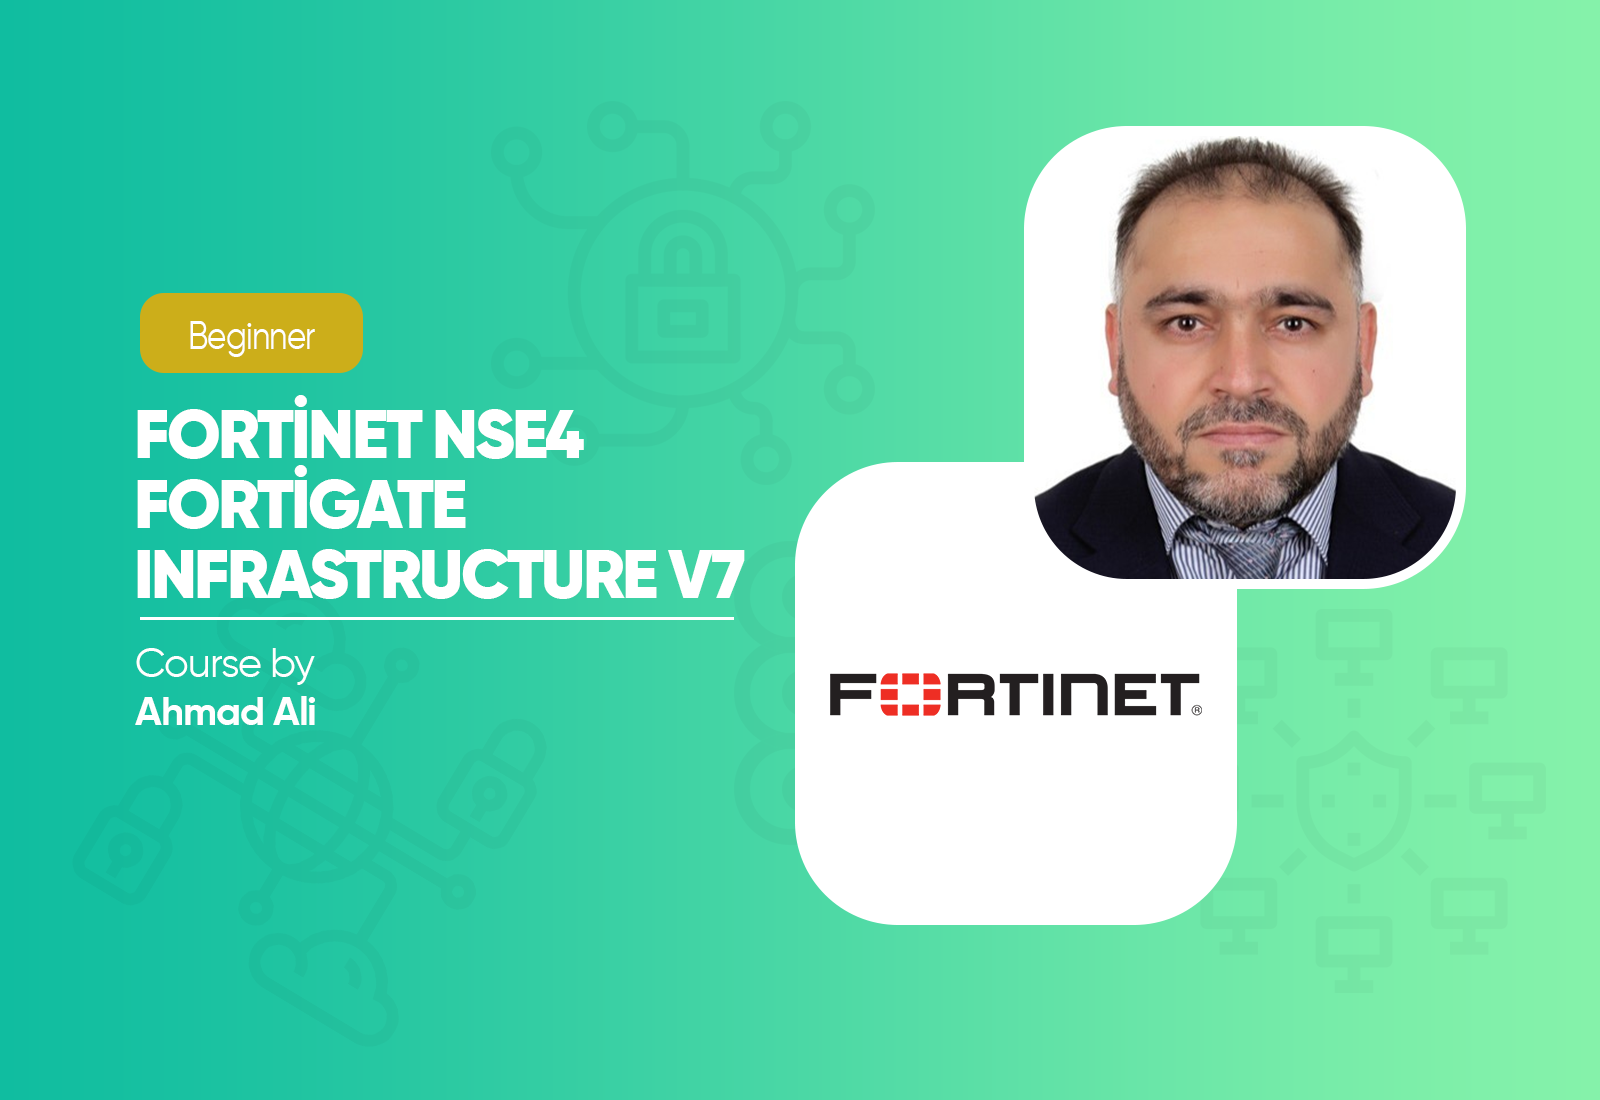 Fortinet NSE4 Fortigate Infrastructure v7 Course 